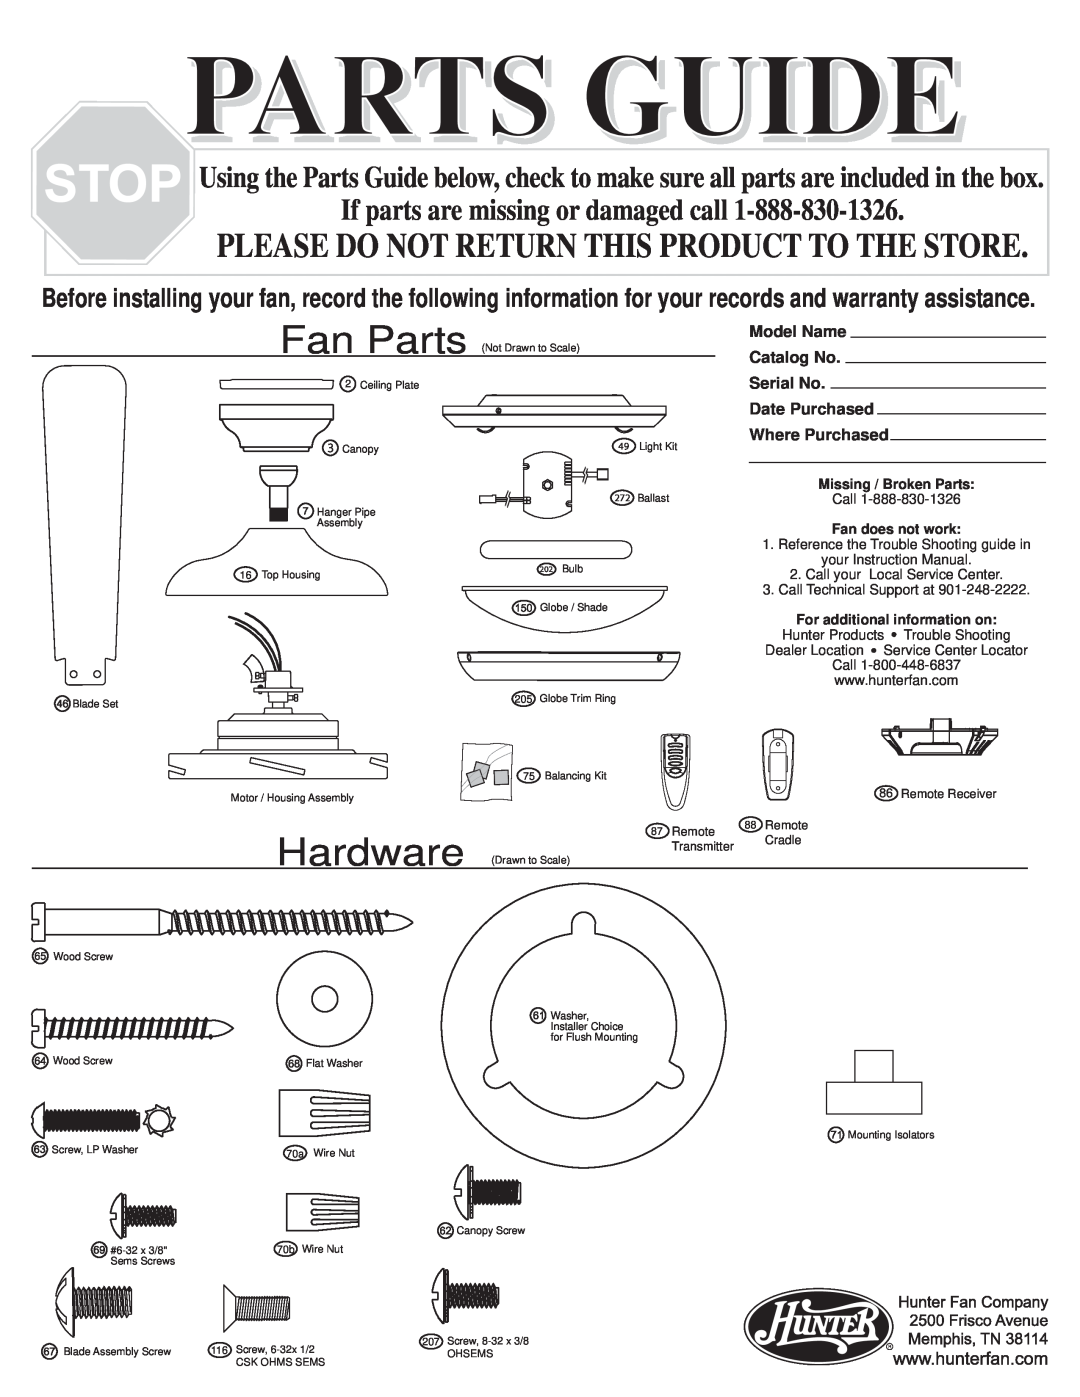 Hunter Fan 21620 warranty Catalog No, Model Name, Serial No, Date Purchased Where Purchased, Parts Guide, Fan Parts, Call 